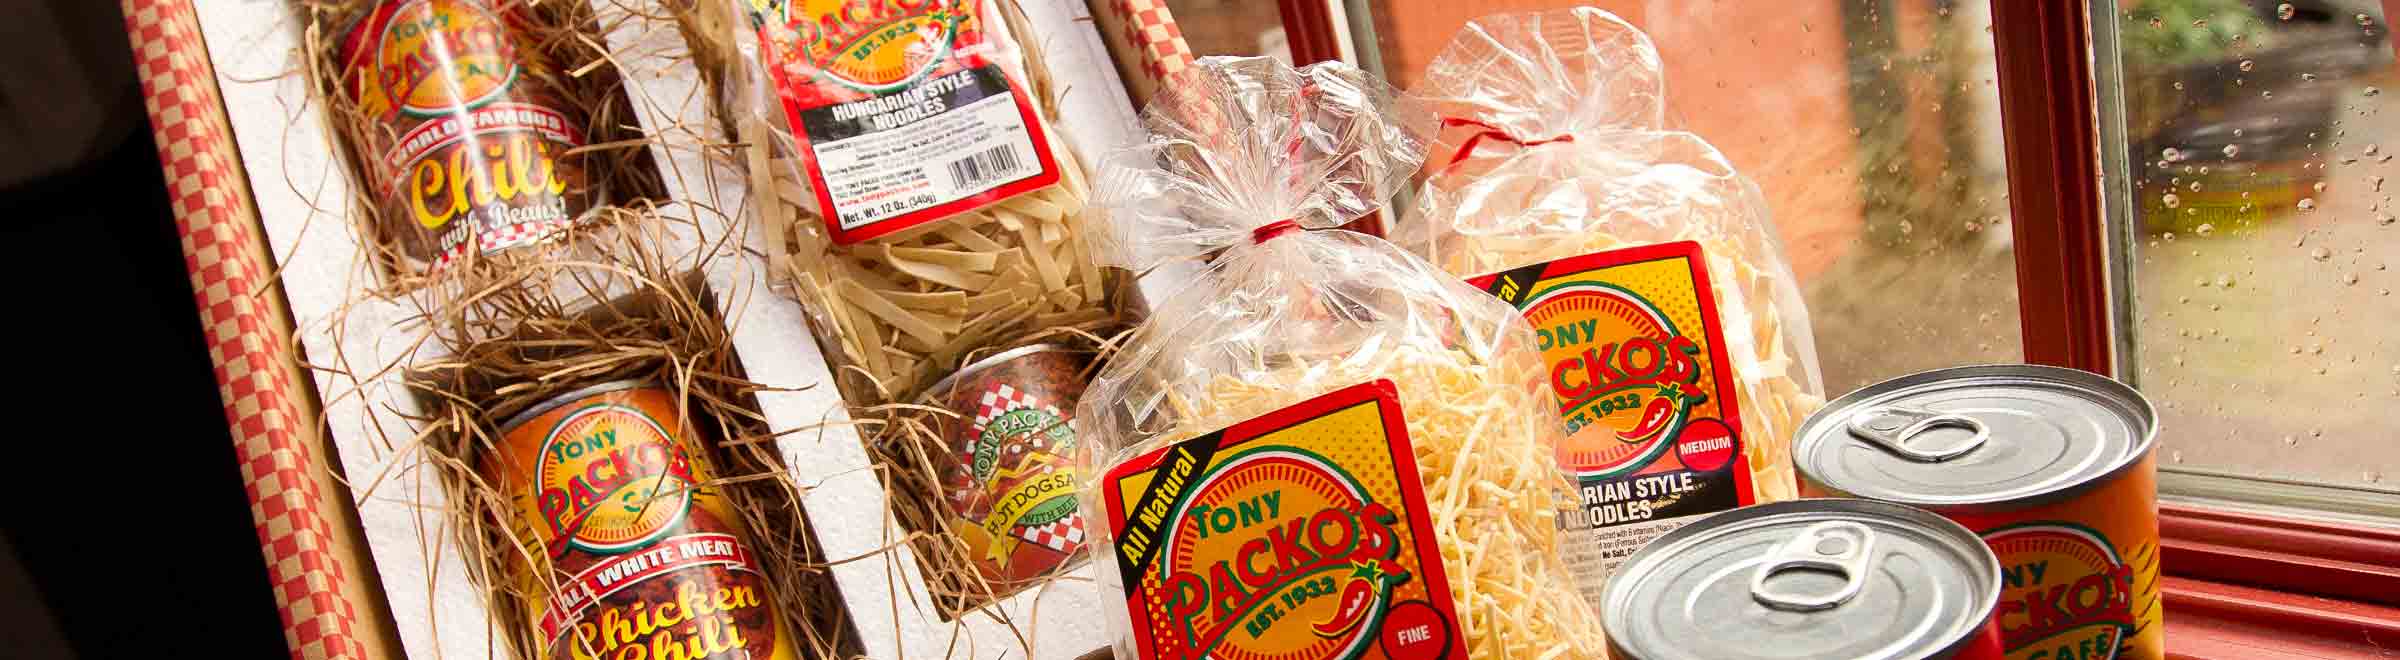 Tony Packo's Gift Pack open box with cans of hot dog chili sauce, chili, pickles & noodles